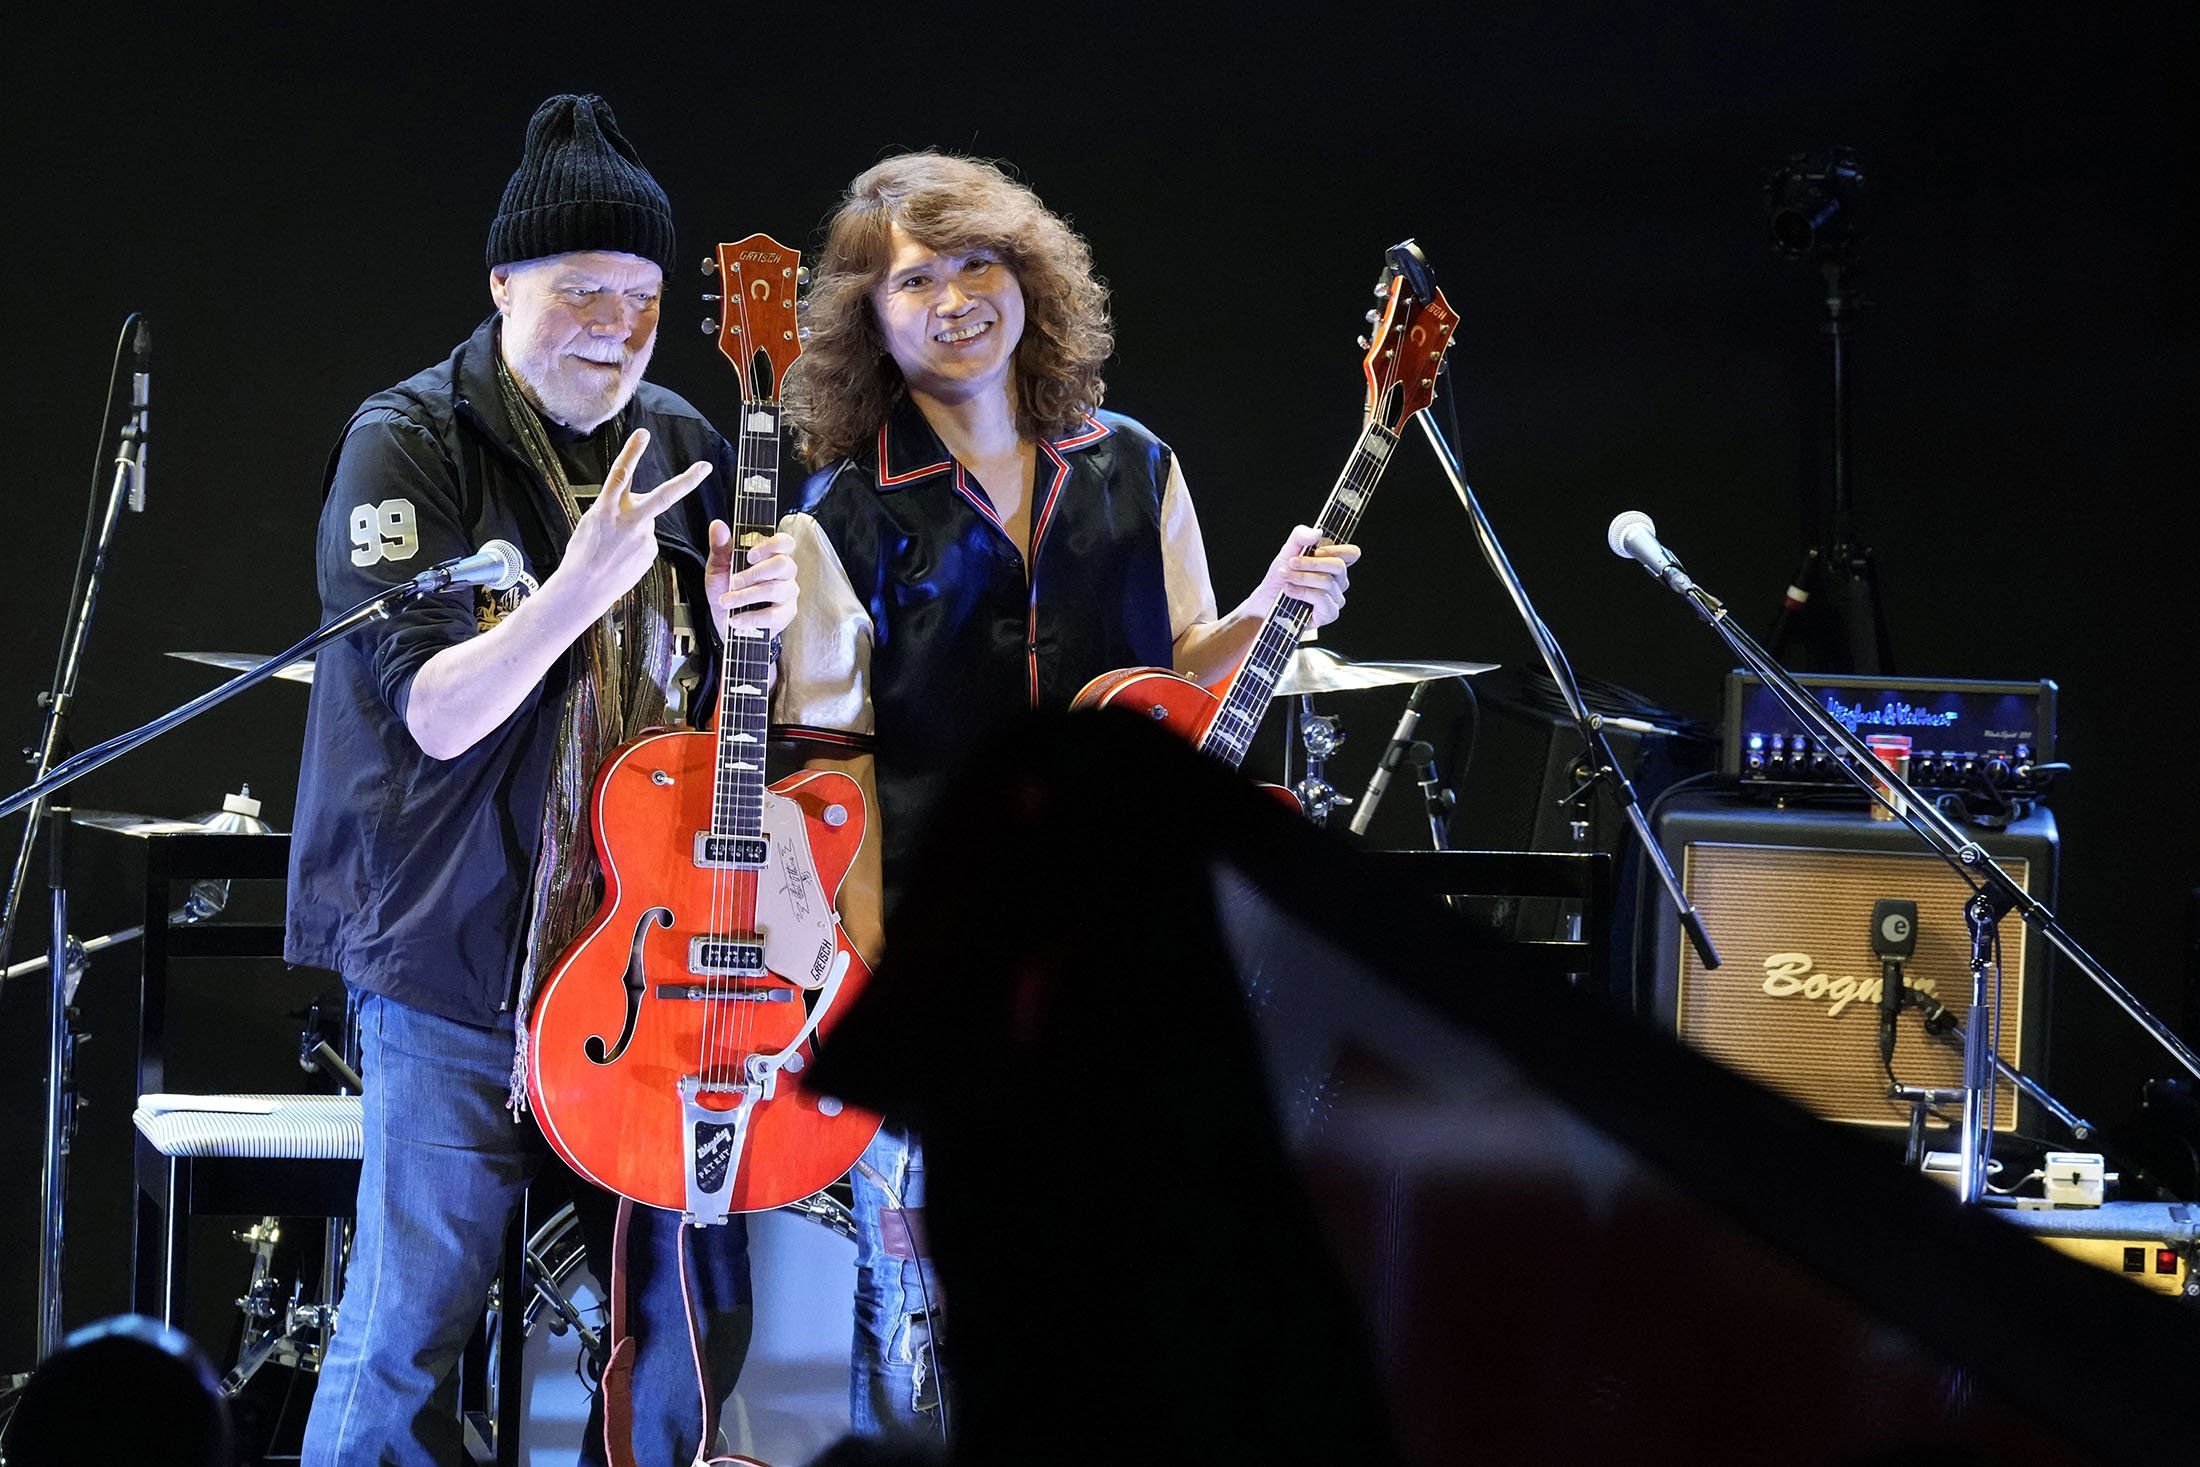 Canadian rock legend Randy Bachman, holding his reunited Gretsch guitar, poses with Japanese musician, TAKESHI during the Lost and Found Guitar Exchange Ceremony, at Canadian Embassy in Tokyo, Japan, July 1, 2022. (AP Photo)